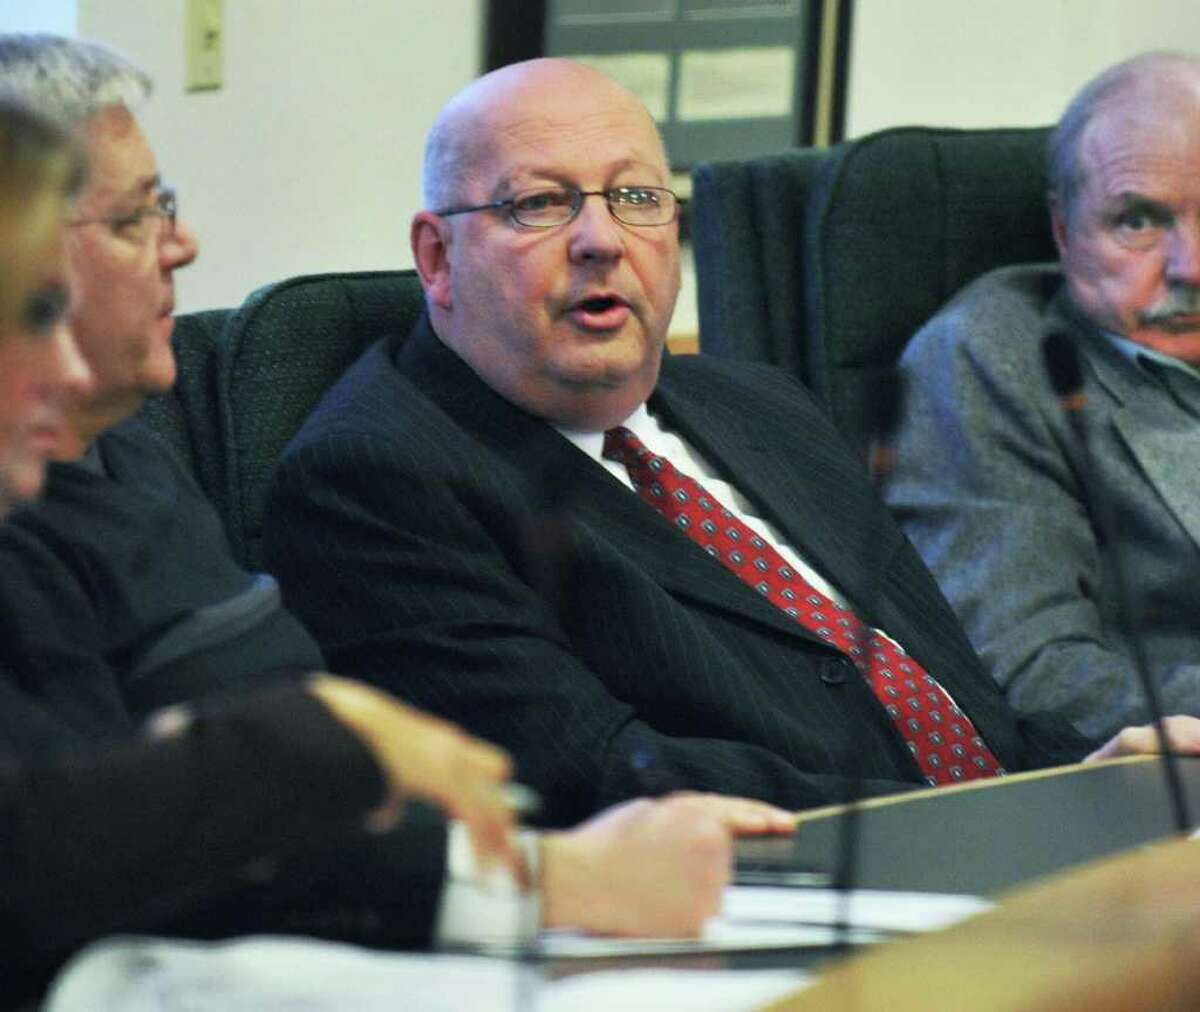 Waterford Supervisor John Lawler said he can lead an unbiased internal investigation. (John Carl D'Annibale / Times Union)